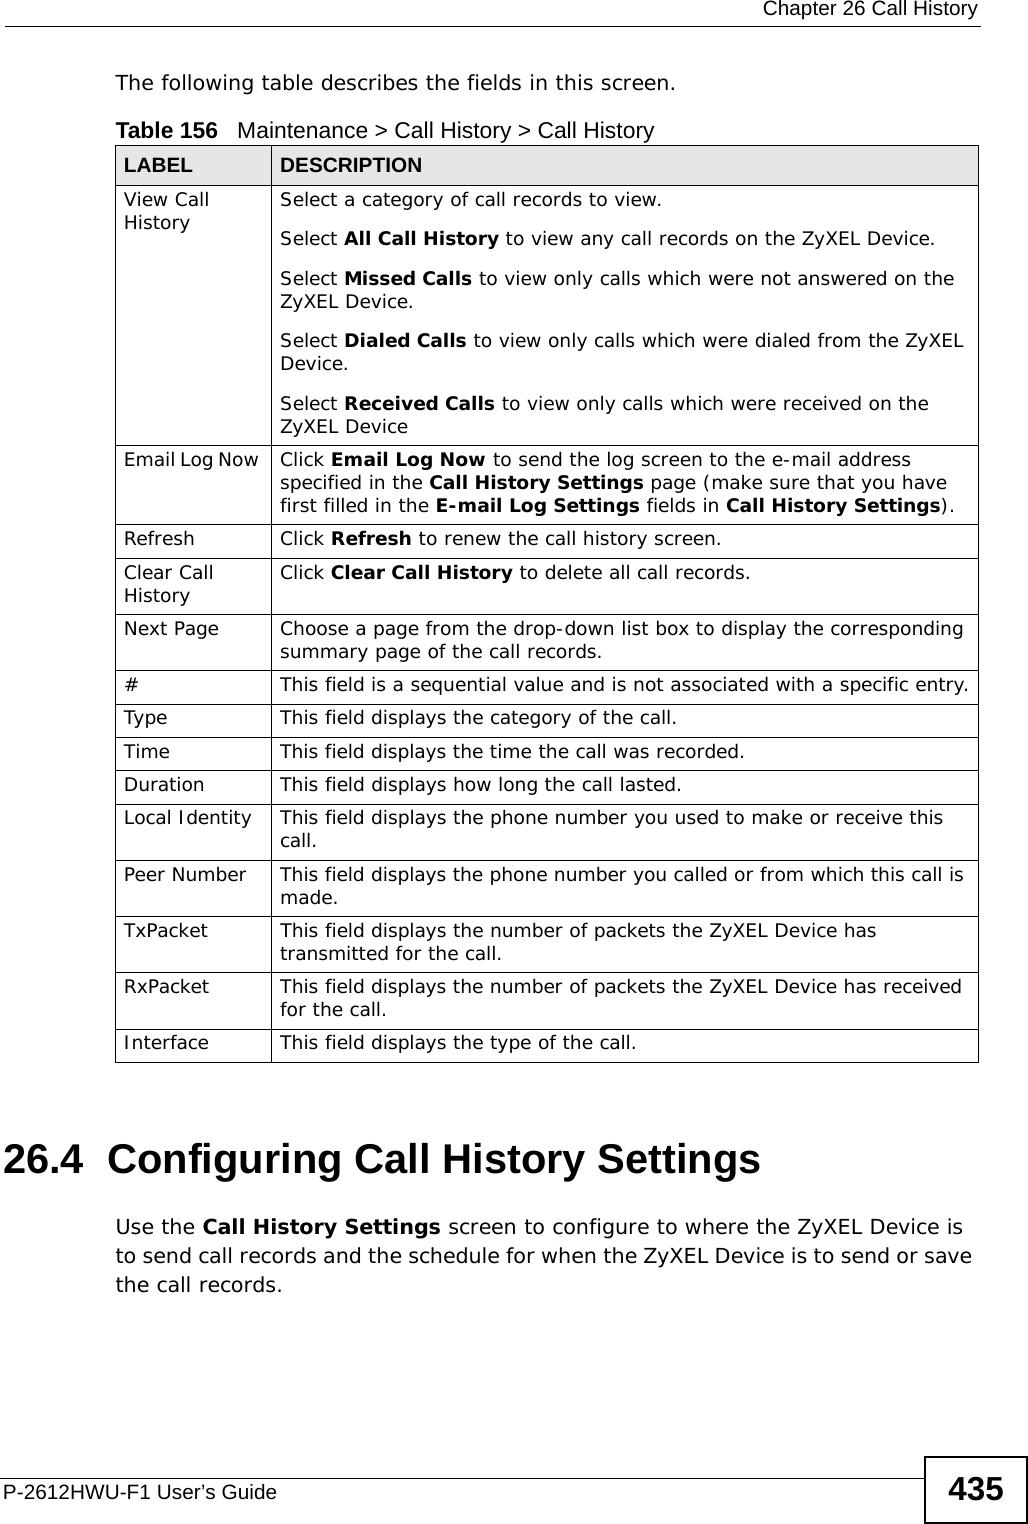  Chapter 26 Call HistoryP-2612HWU-F1 User’s Guide 435The following table describes the fields in this screen.   26.4  Configuring Call History Settings Use the Call History Settings screen to configure to where the ZyXEL Device is to send call records and the schedule for when the ZyXEL Device is to send or save the call records. Table 156   Maintenance &gt; Call History &gt; Call HistoryLABEL DESCRIPTIONView Call History Select a category of call records to view.Select All Call History to view any call records on the ZyXEL Device.Select Missed Calls to view only calls which were not answered on the ZyXEL Device.Select Dialed Calls to view only calls which were dialed from the ZyXEL Device.Select Received Calls to view only calls which were received on the ZyXEL DeviceEmail Log Now  Click Email Log Now to send the log screen to the e-mail address specified in the Call History Settings page (make sure that you have first filled in the E-mail Log Settings fields in Call History Settings).Refresh Click Refresh to renew the call history screen. Clear Call History  Click Clear Call History to delete all call records. Next Page Choose a page from the drop-down list box to display the corresponding summary page of the call records.#This field is a sequential value and is not associated with a specific entry.Type This field displays the category of the call.Time  This field displays the time the call was recorded. Duration This field displays how long the call lasted.Local Identity This field displays the phone number you used to make or receive this call.Peer Number This field displays the phone number you called or from which this call is made.TxPacket This field displays the number of packets the ZyXEL Device has transmitted for the call.RxPacket This field displays the number of packets the ZyXEL Device has received for the call.Interface This field displays the type of the call.